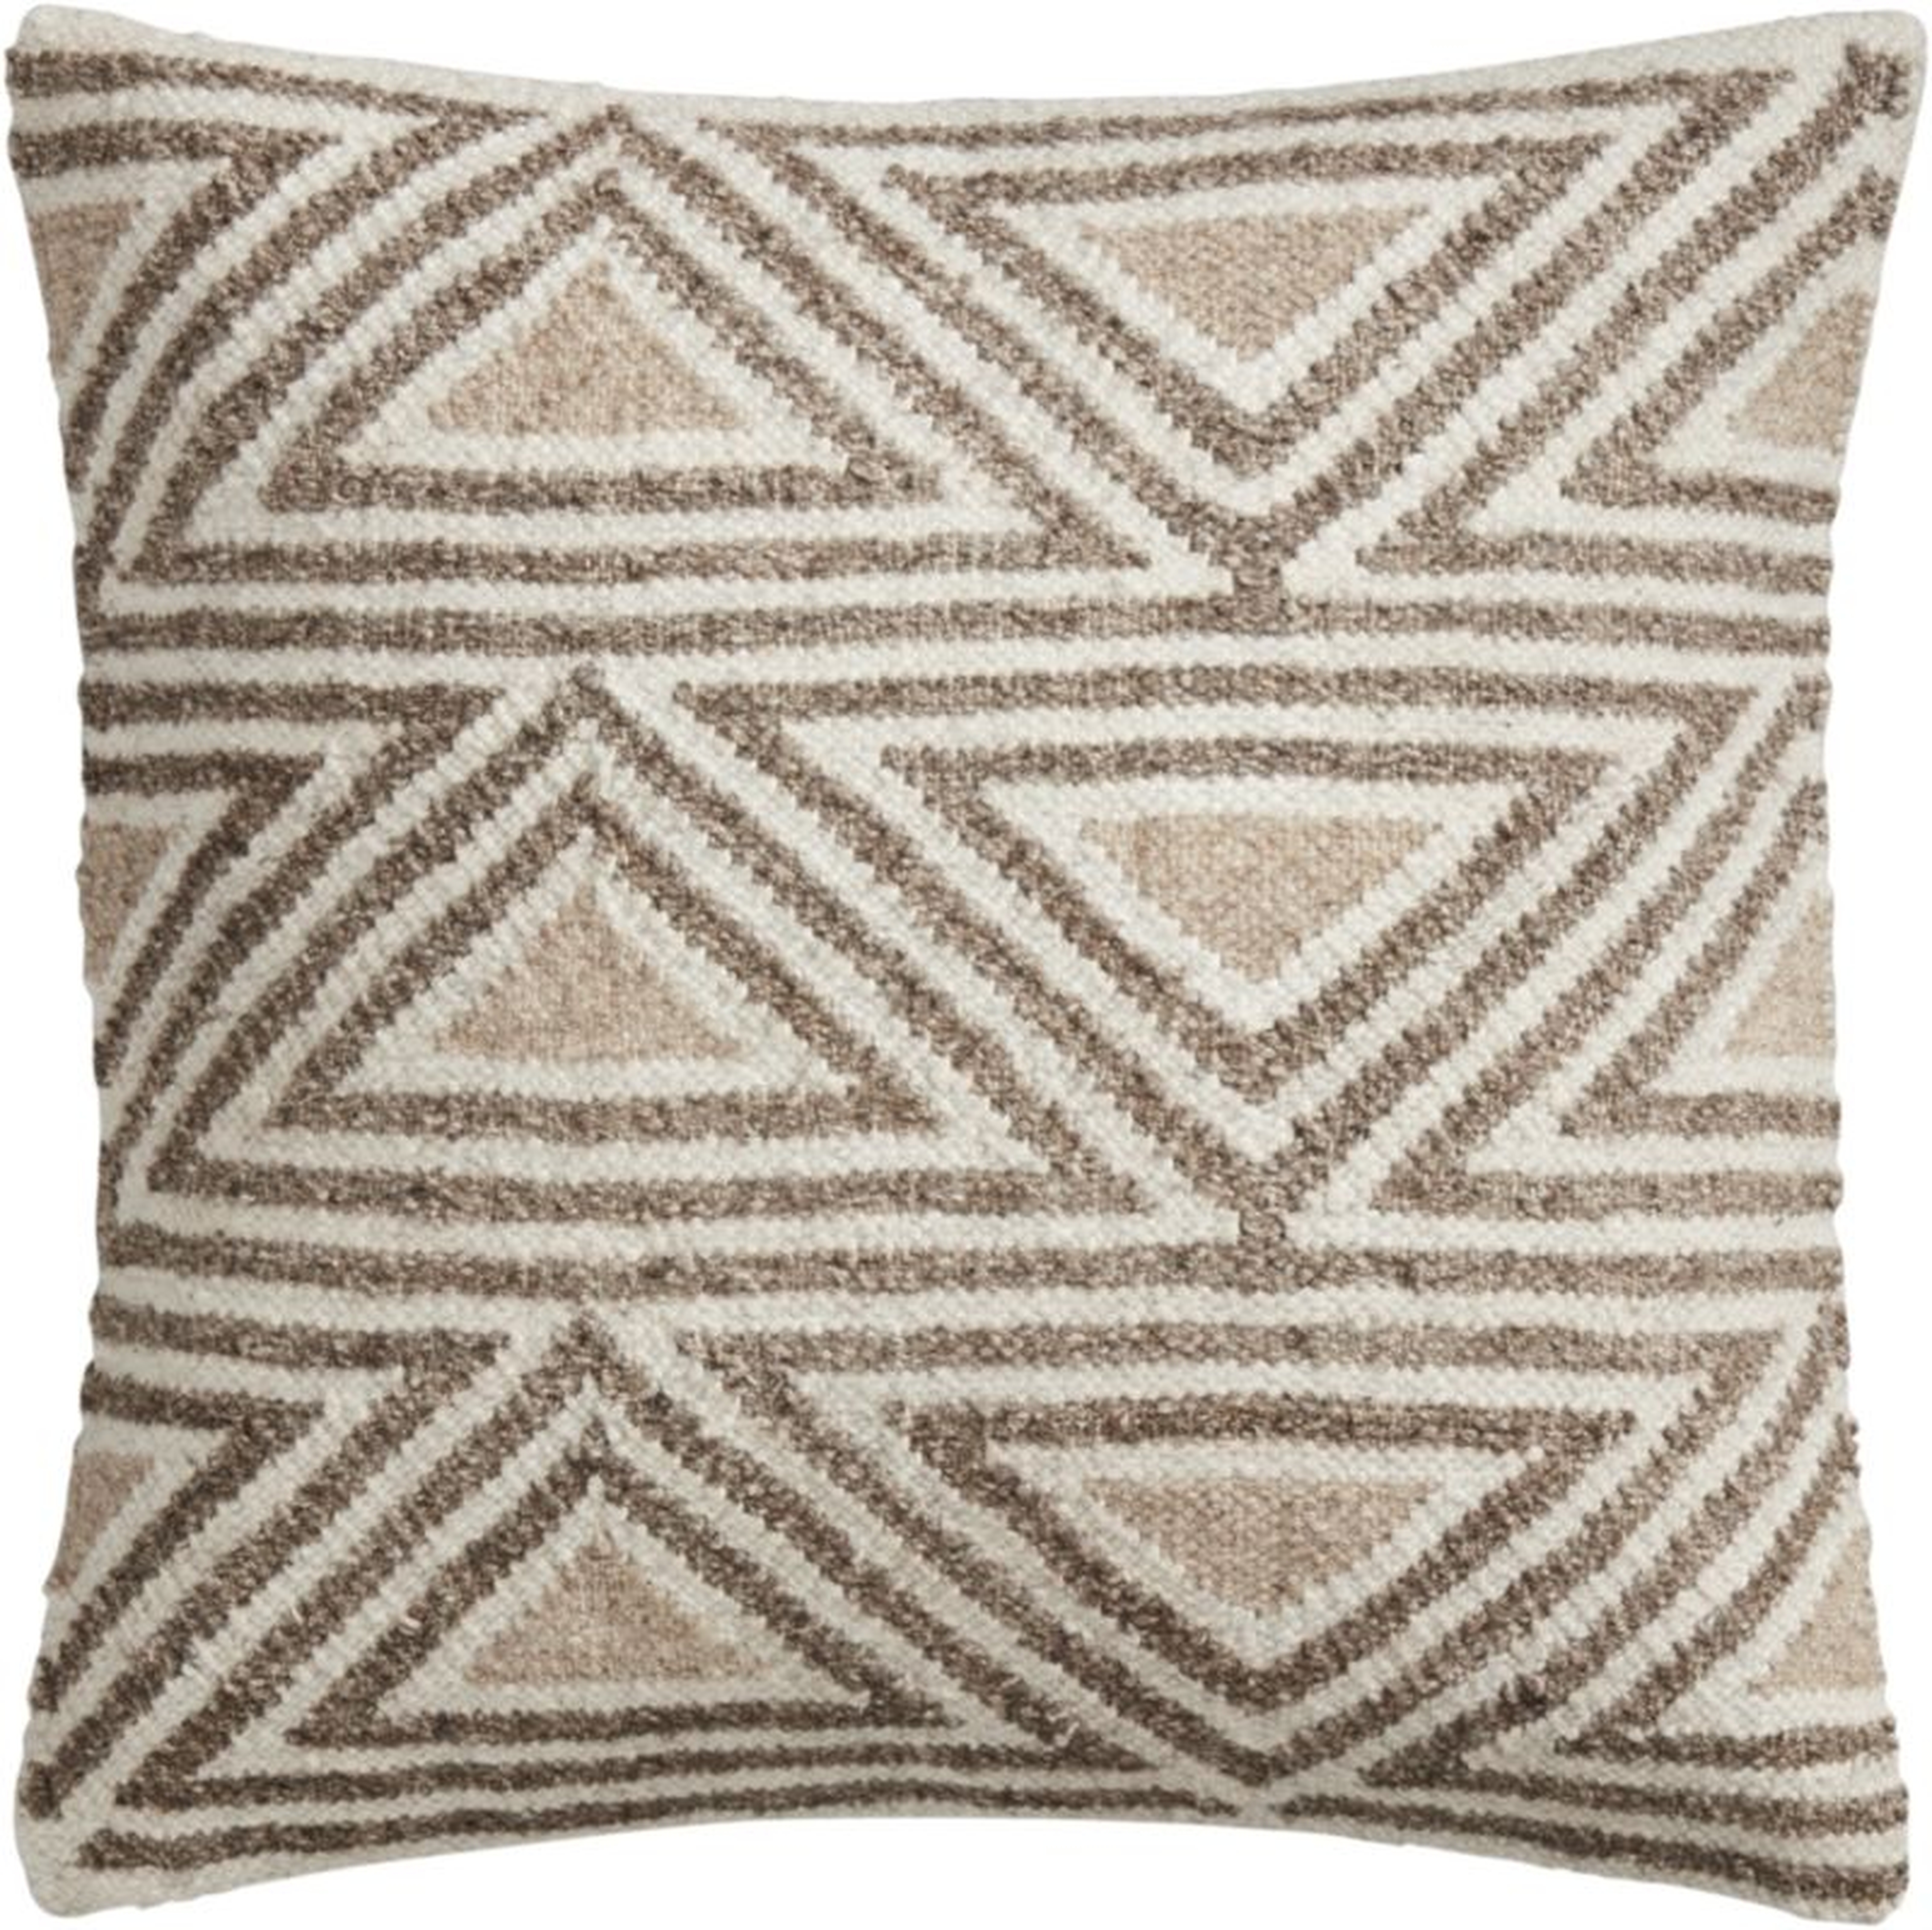 18" Tula Triangle Pattern Pillow with Feather-Down Insert - CB2